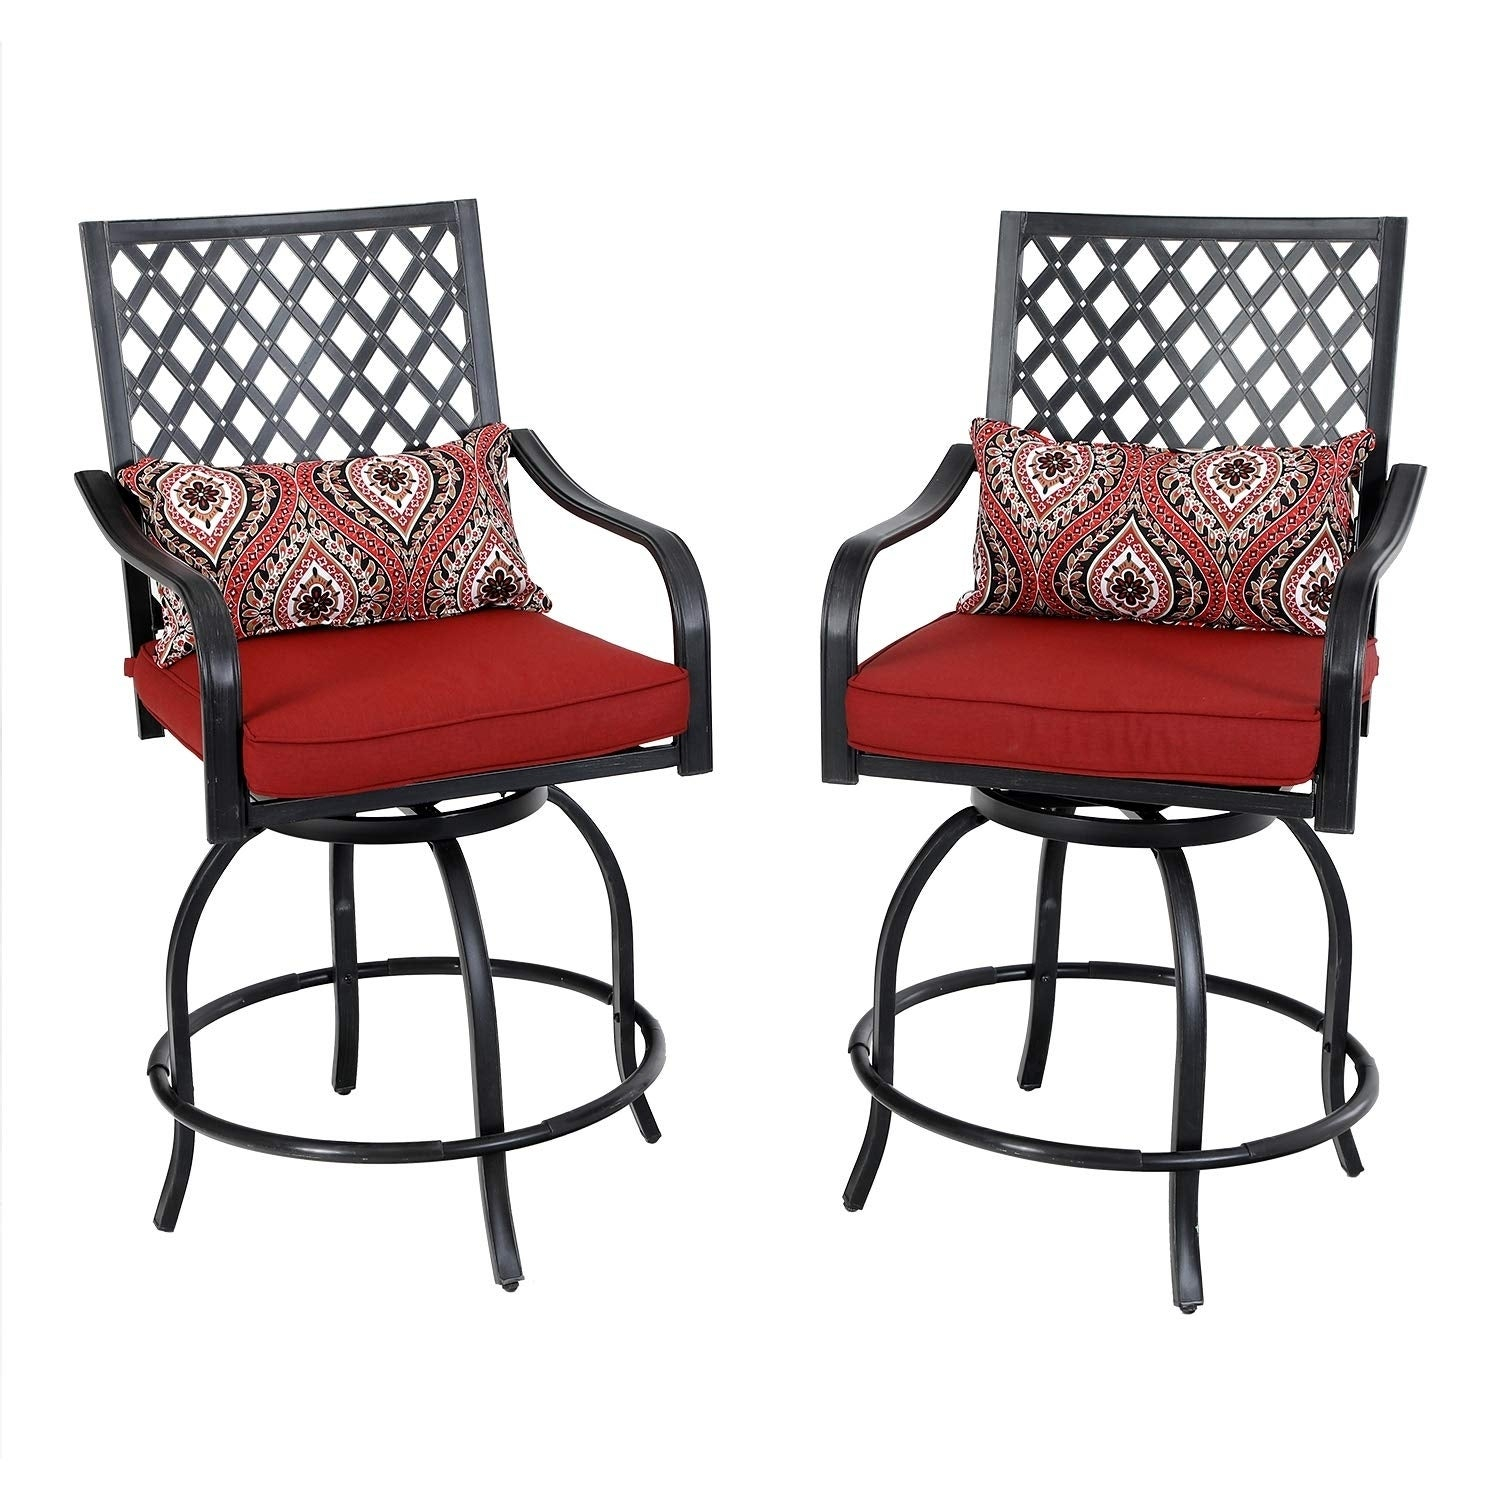 Phi Villa Outdoor Extra Wide Height Swivel Bar Stools Arms Chairs 2 Pack Inside Dimensions 1500 X 1500 